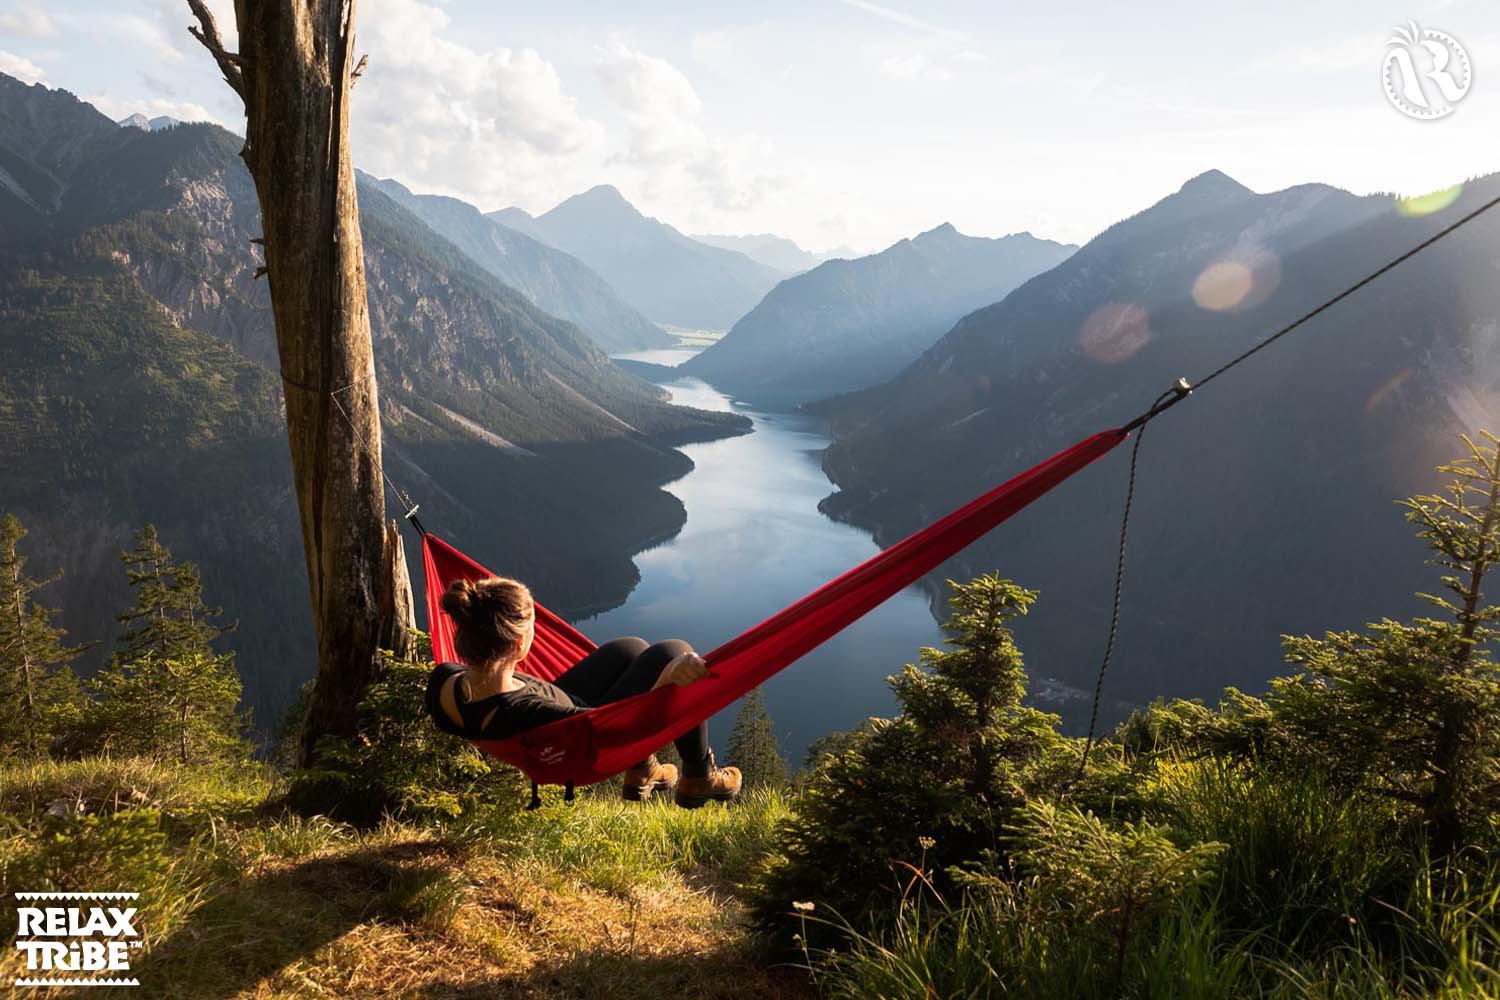 silk-traveller-xl-chili-single-portable-travel-hammock-for-outdoor-camping-red-mountains-river-landscape